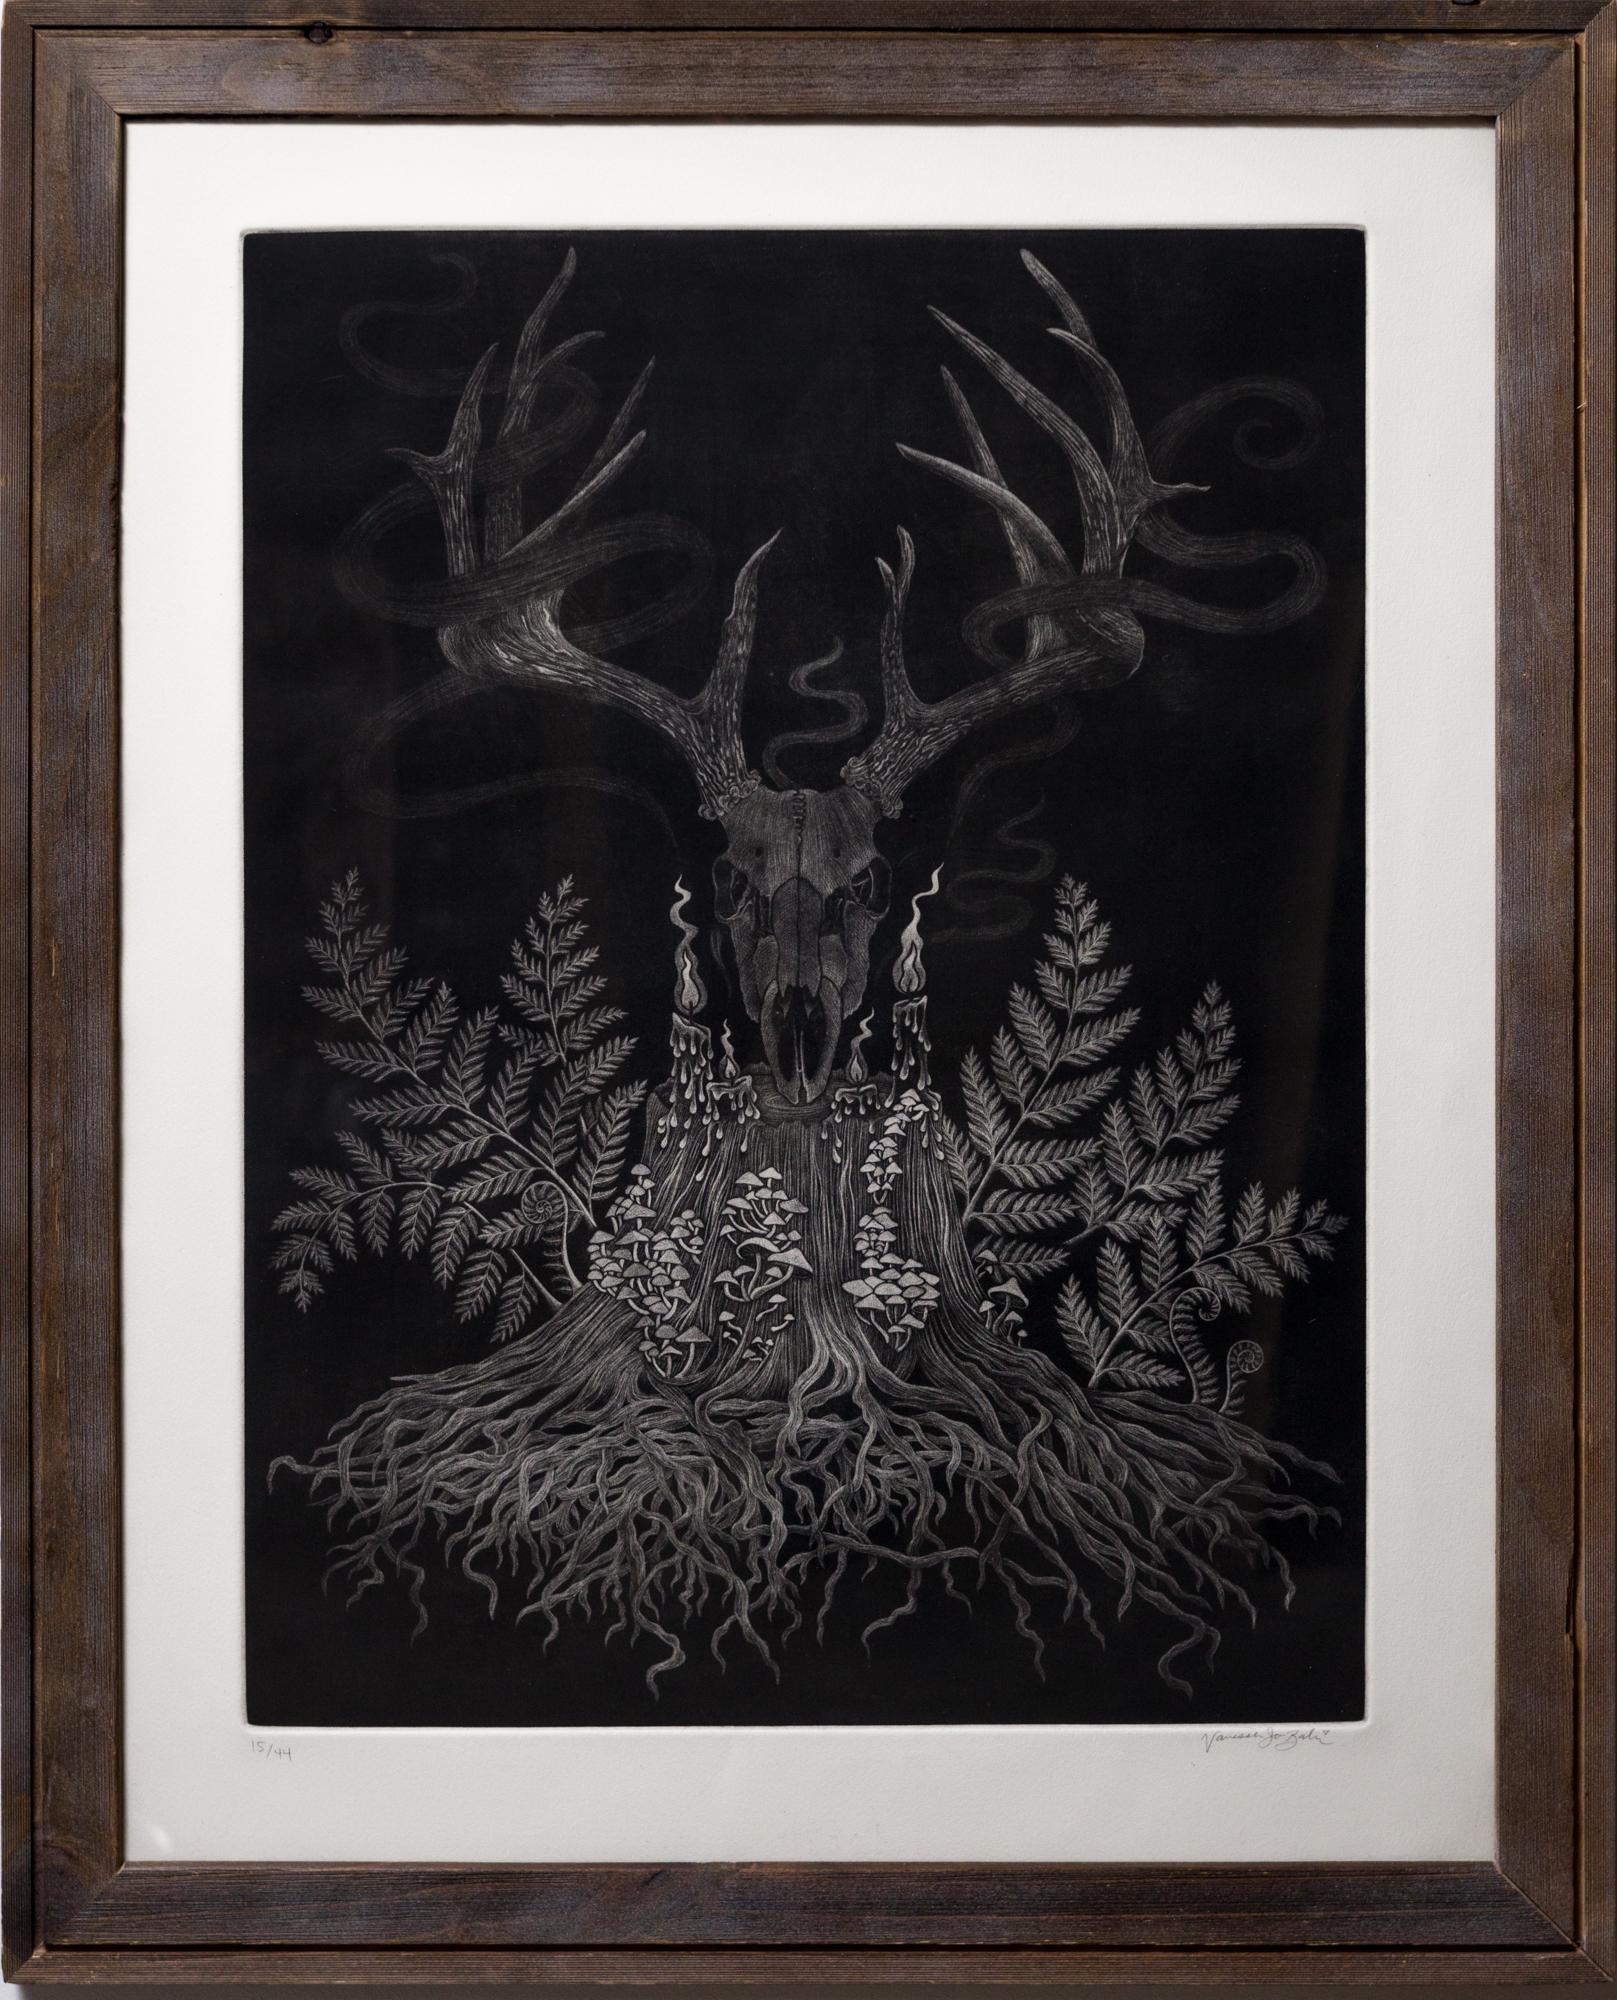 This piece titled "Never Say Die" is an original print by Samantha Mendoza and is made from mezzotint. This piece measures 31.25"h x 25.5"w framed, and is shipped in the pictured wooden frame.

Originally from Chicago, Illinois, Vanessa received her